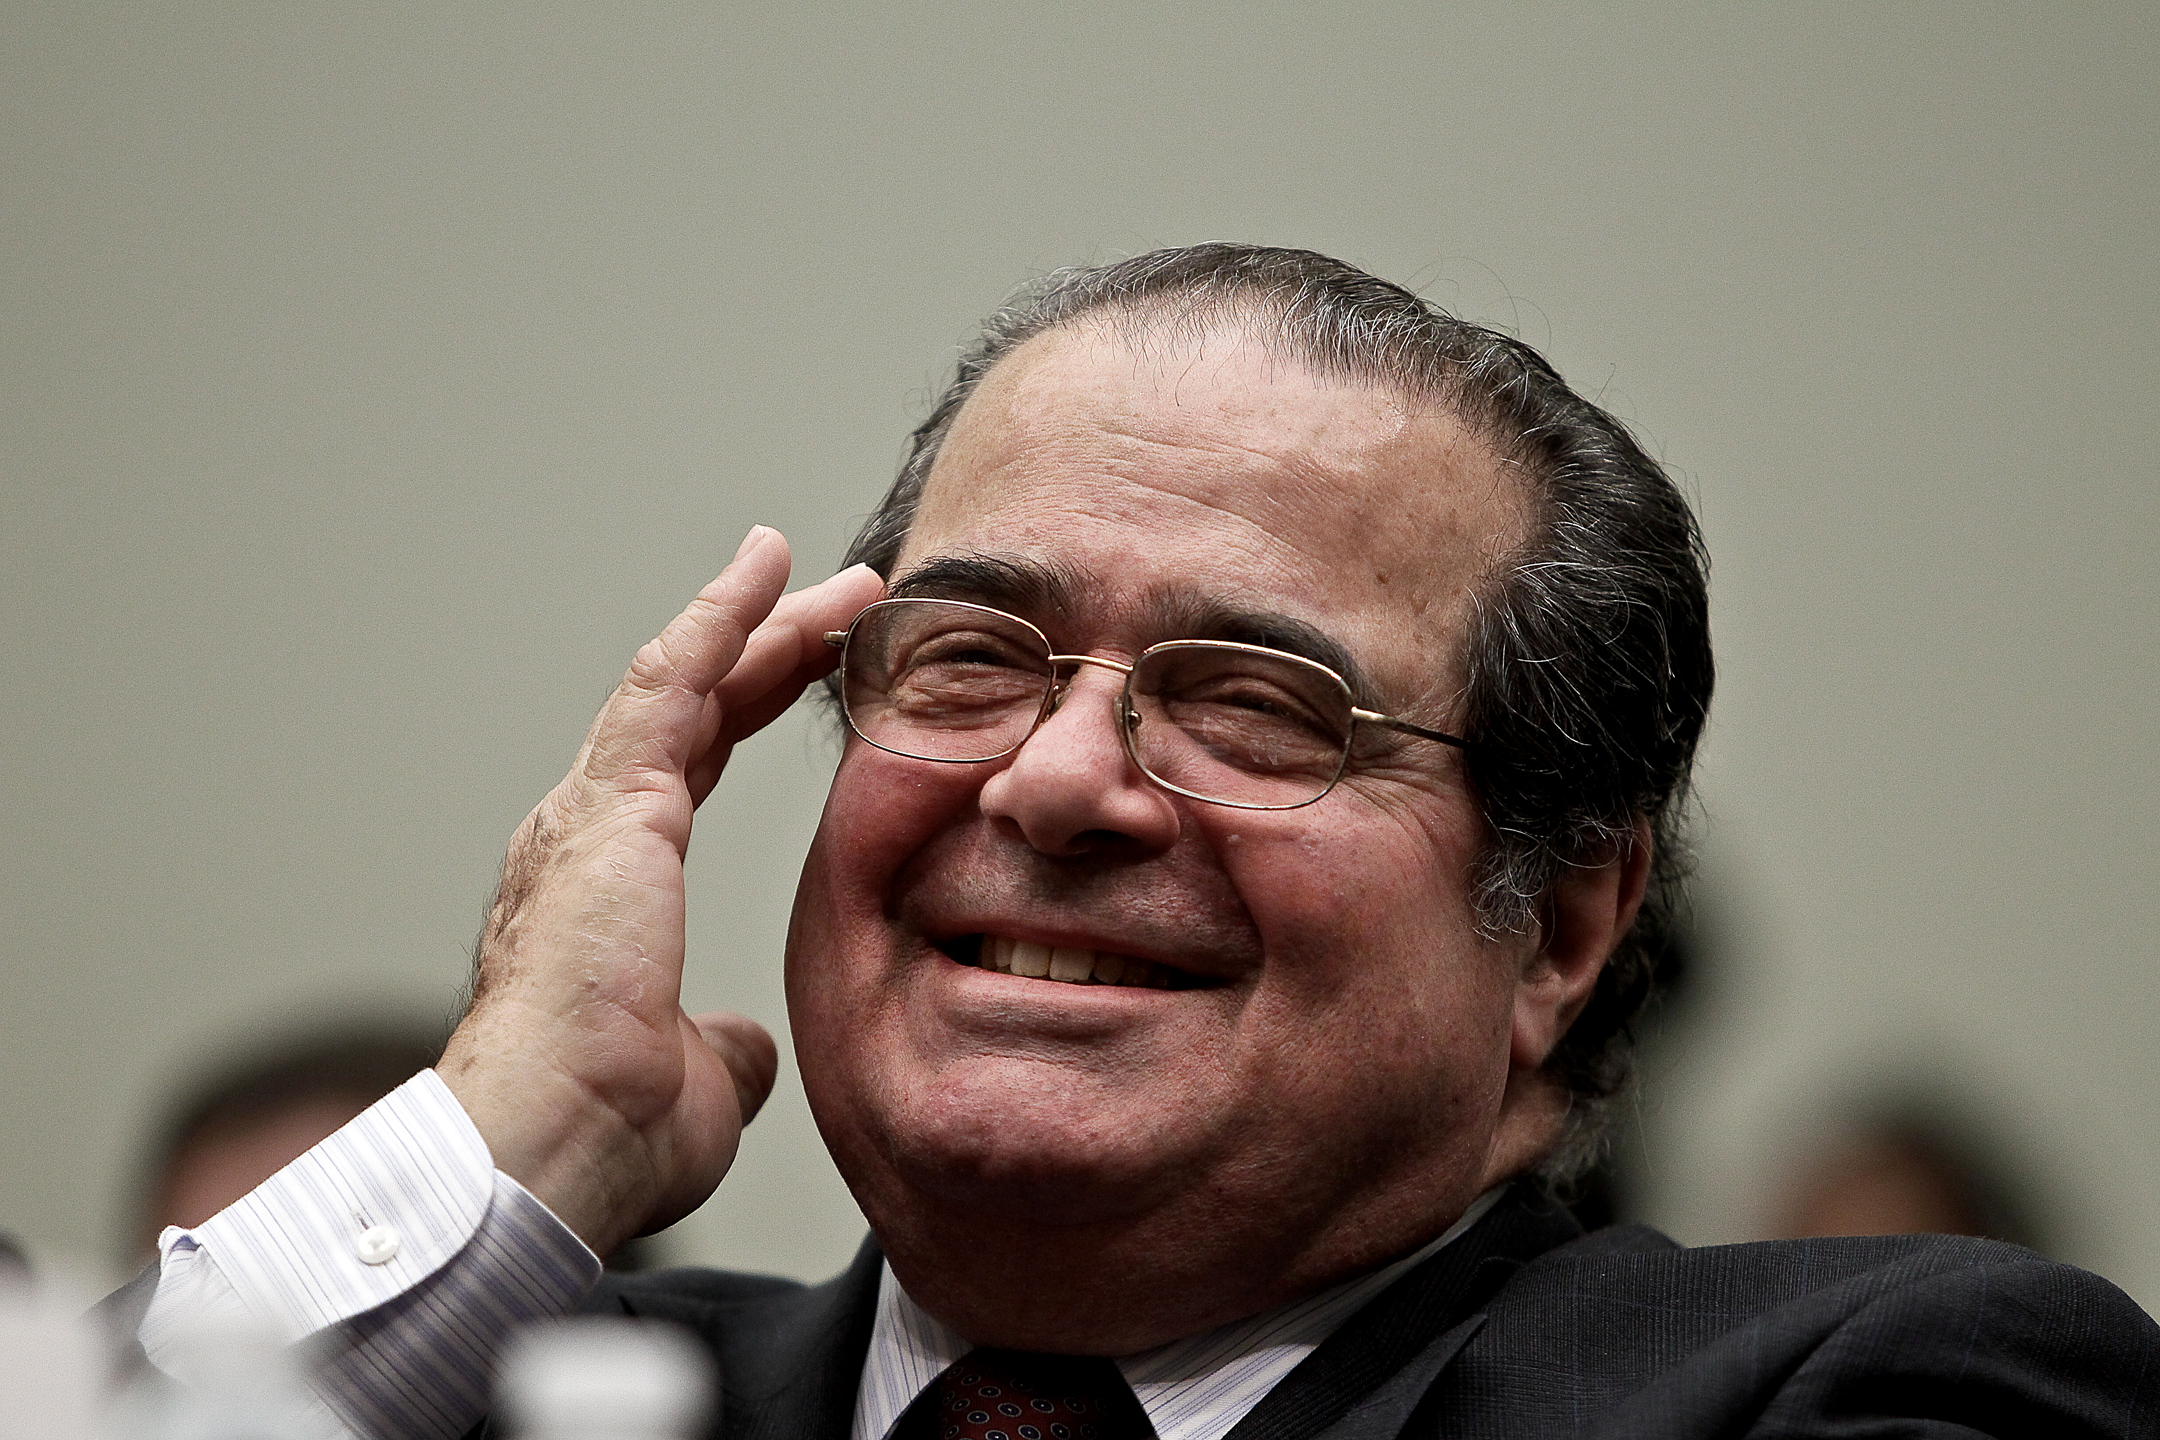 "Supreme Court Justice Antonin Scalia" by Stephen Masker (CC BY 2.0)